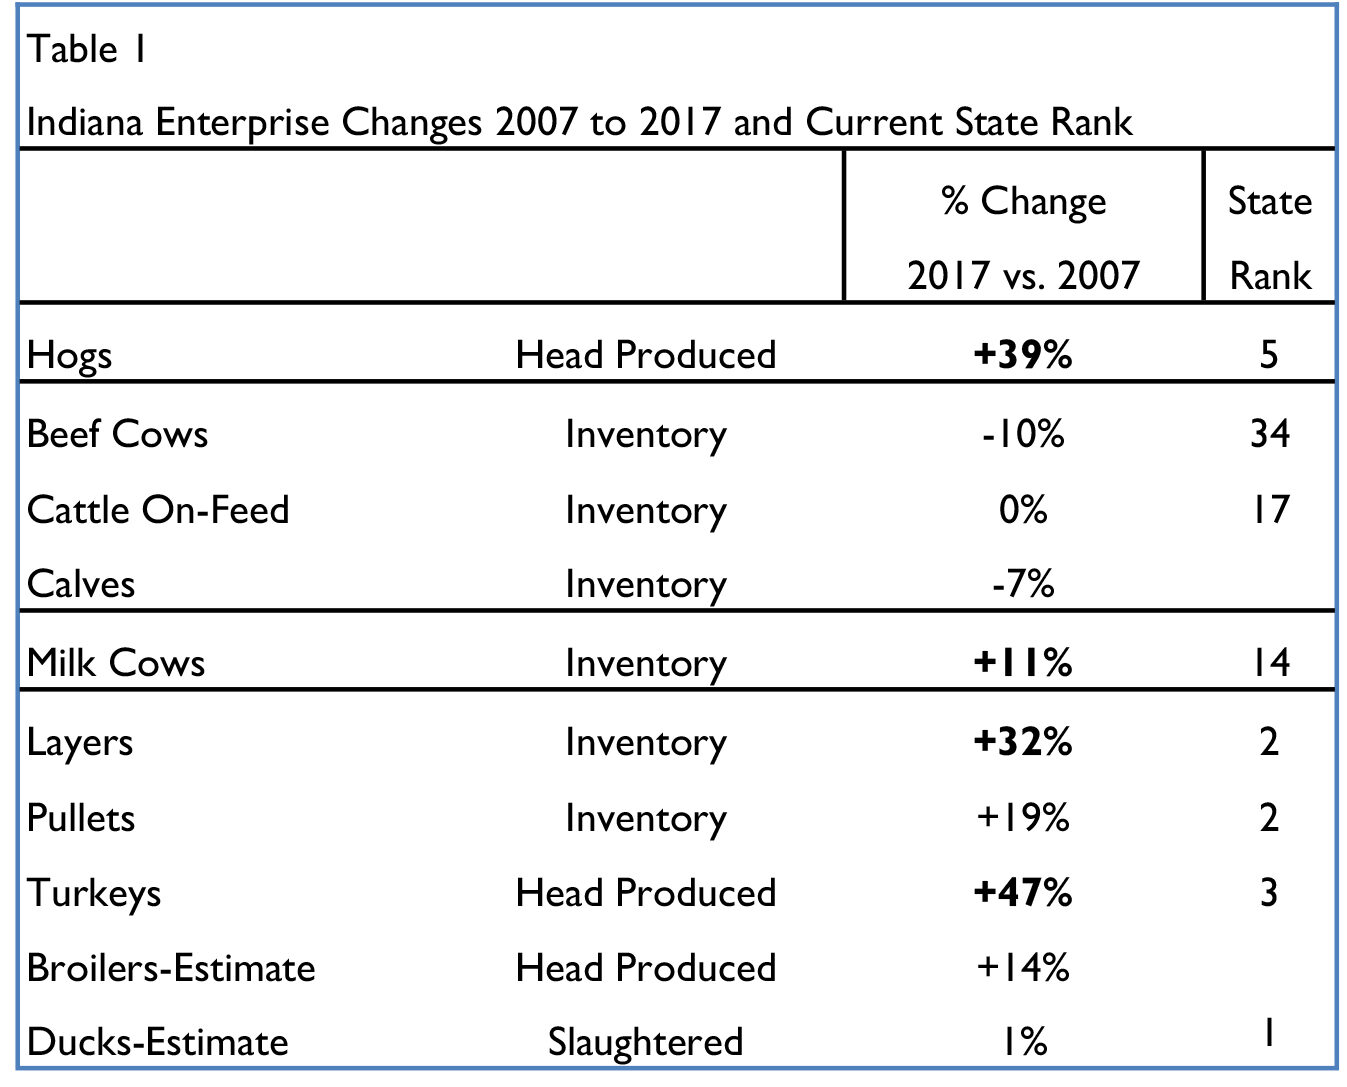 Indiana Enterprise Changes 2007 to 2017 and Current State Rank